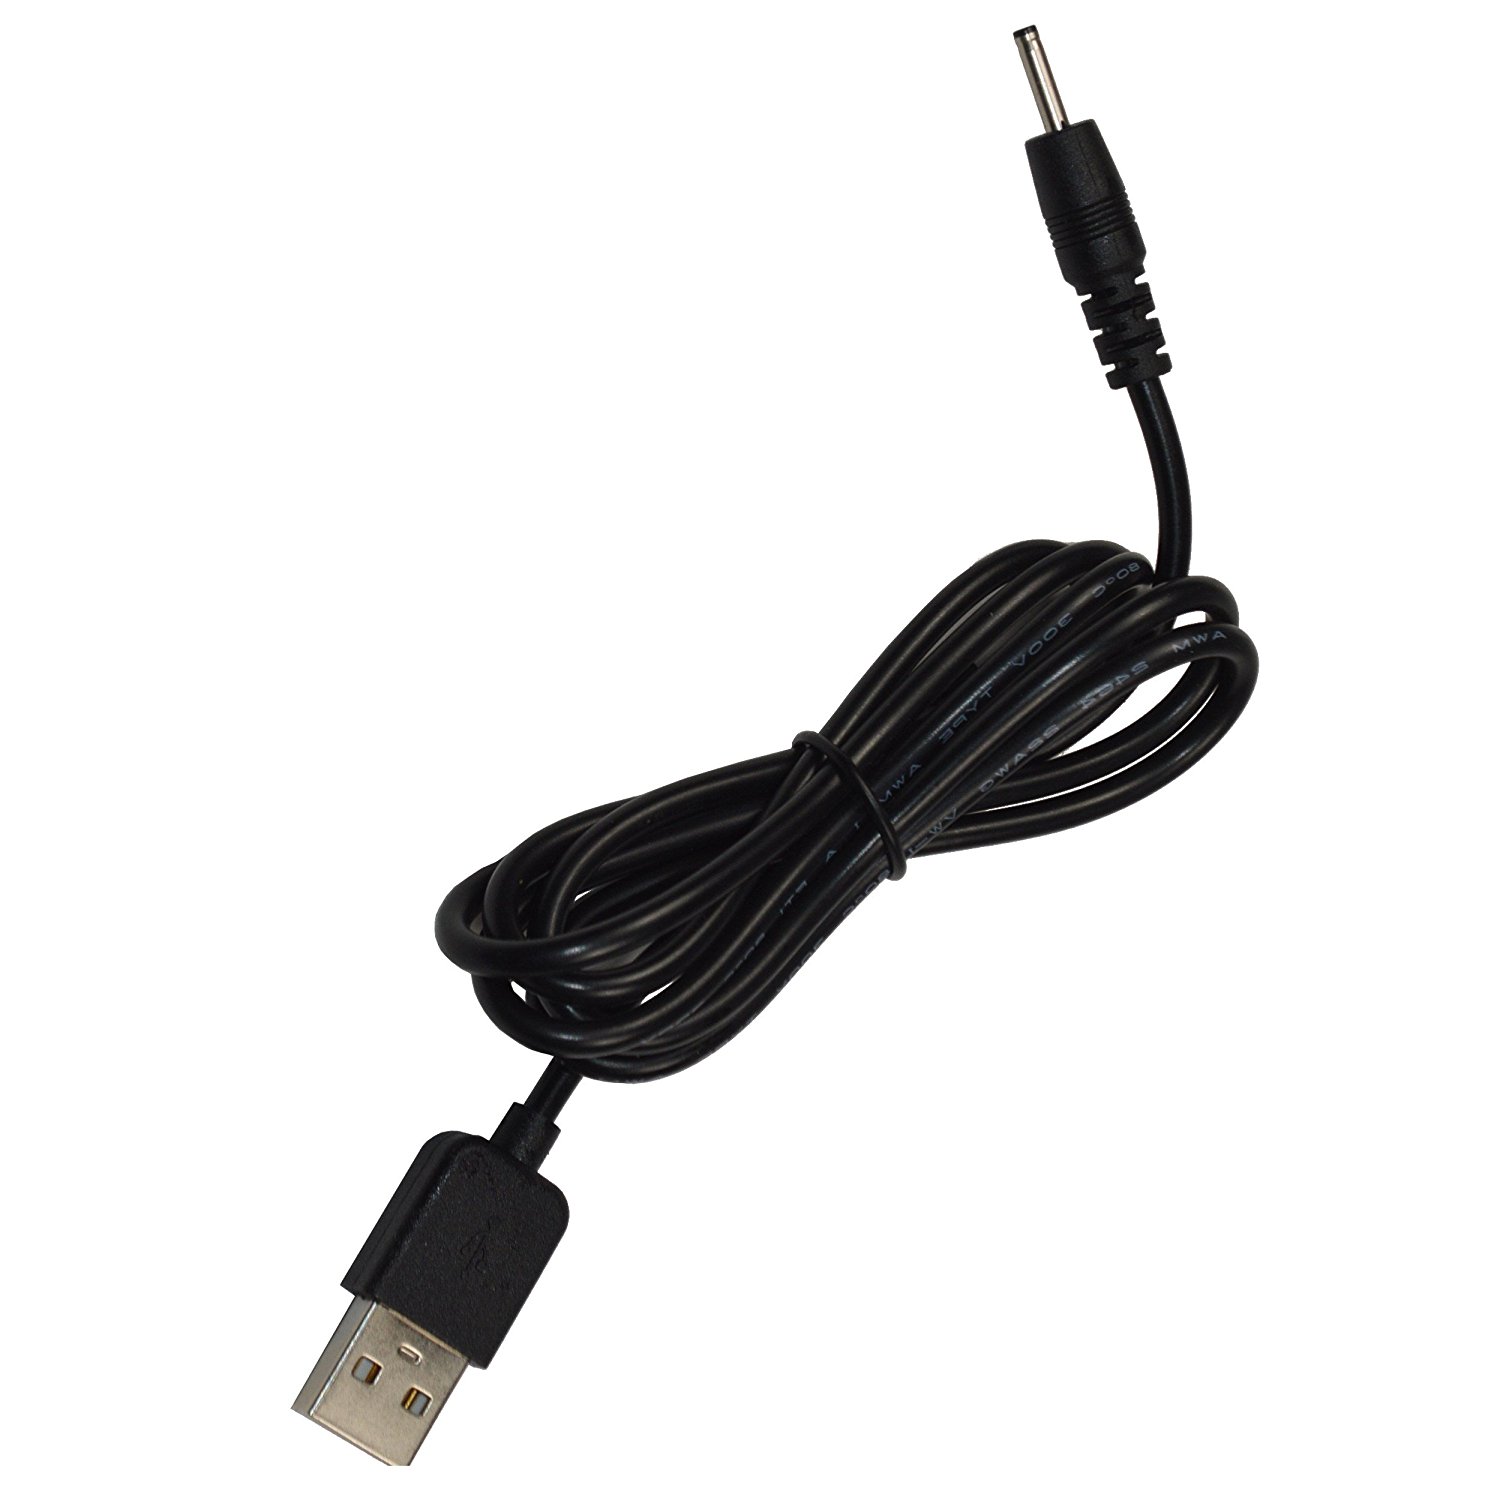 HQRP USB to DC 5V Charger Cable for Curtis Proscan PLT 7033D / PLT7033D, PLT 8031 / PLT8031, PLT 7044K / PLT7044K, PLT 7035 / PLT7035 Tablet PC Cord Lead Wire Adapter - image 1 of 4